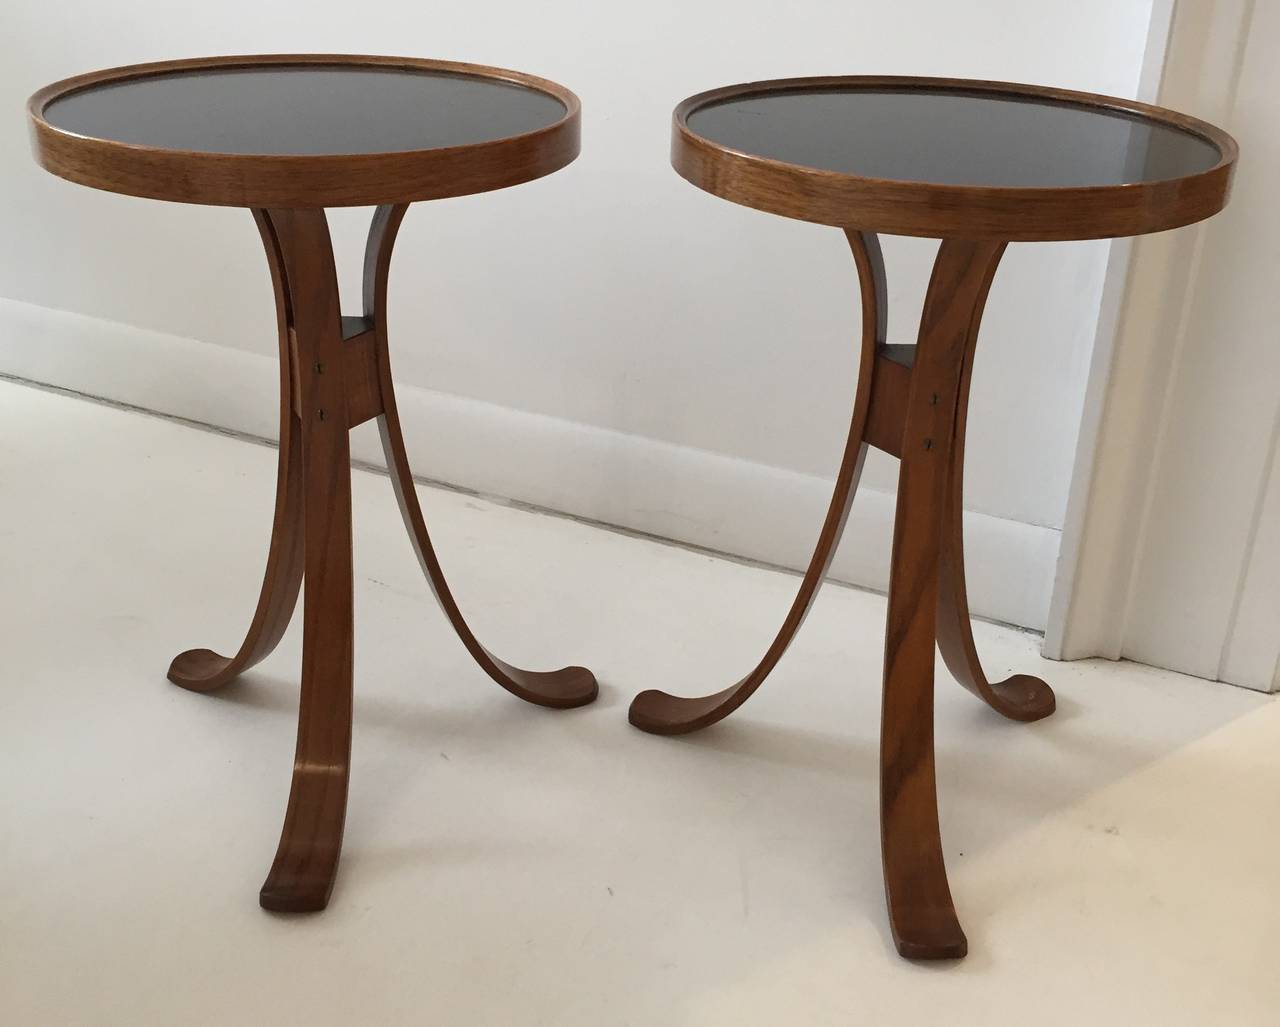 Elegant Edward Wormley design.  Described in the Dunbar catalog as snack tables, these are rarely found in a pair.  Bentwood legs, with walnut-rimmed black laminate table tops. Dunbar labels to each example. Priced per pair.